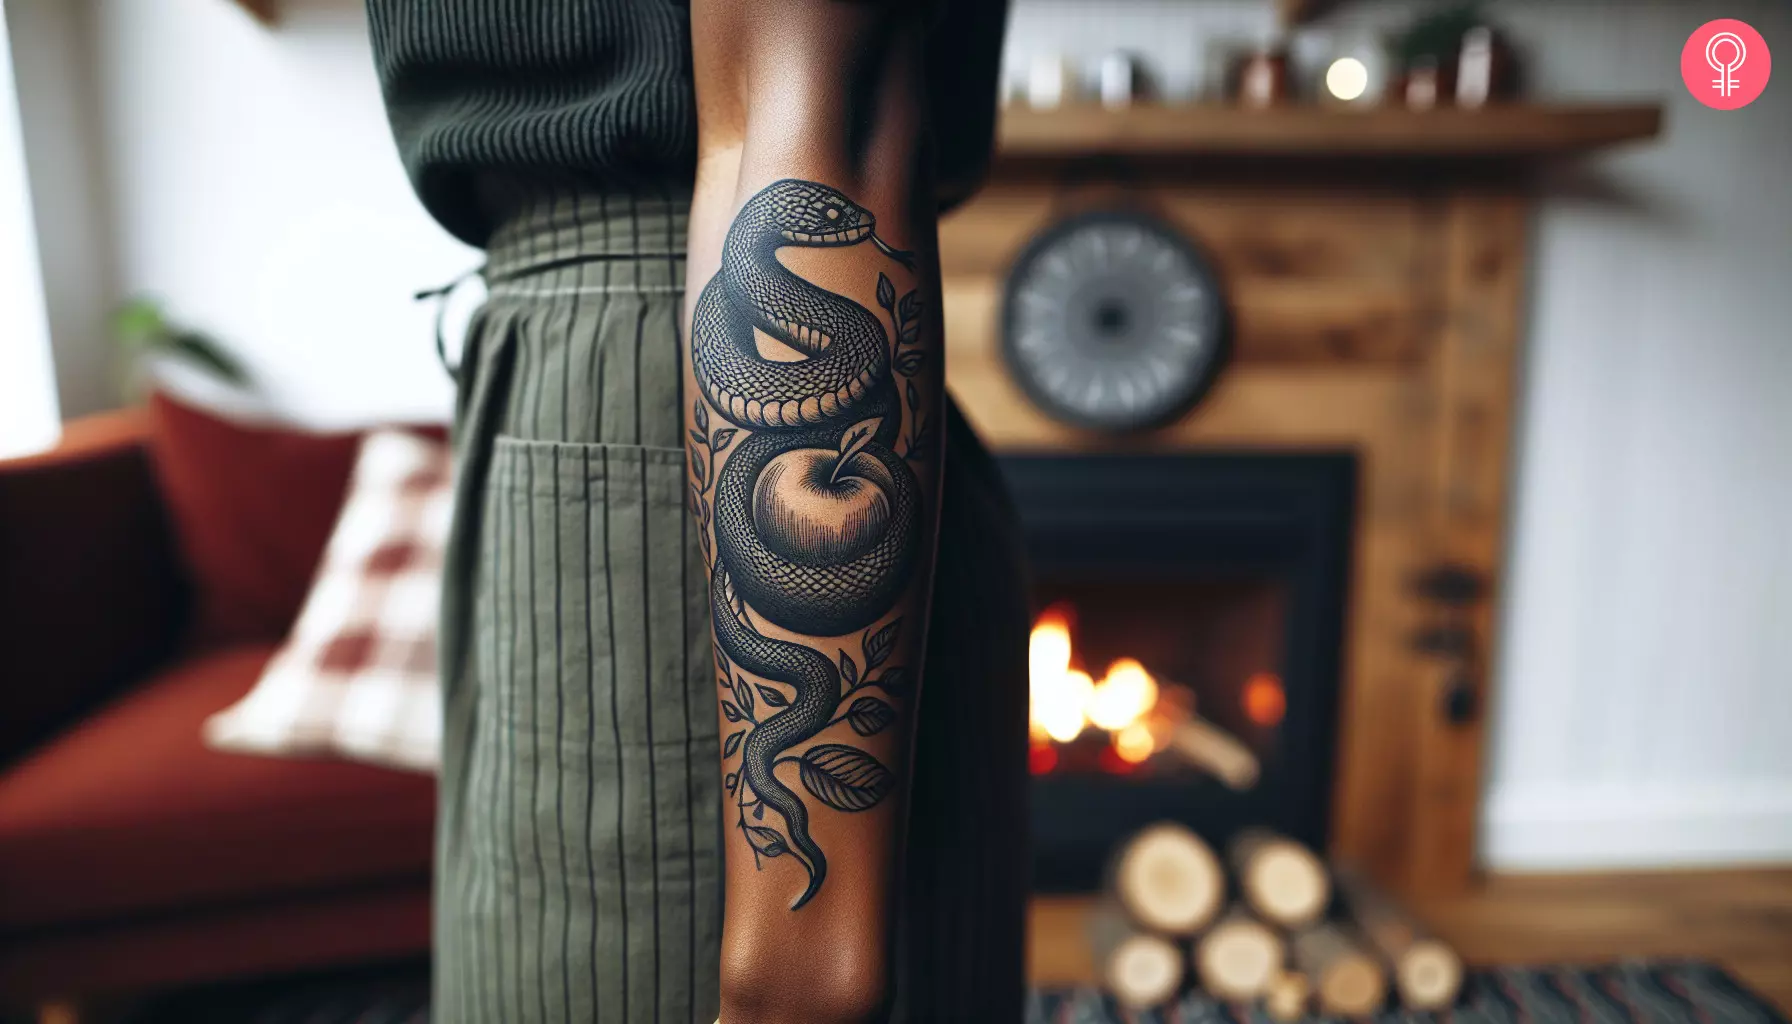 Forbidden fruit tattoo depicting apple and snake on the forearm